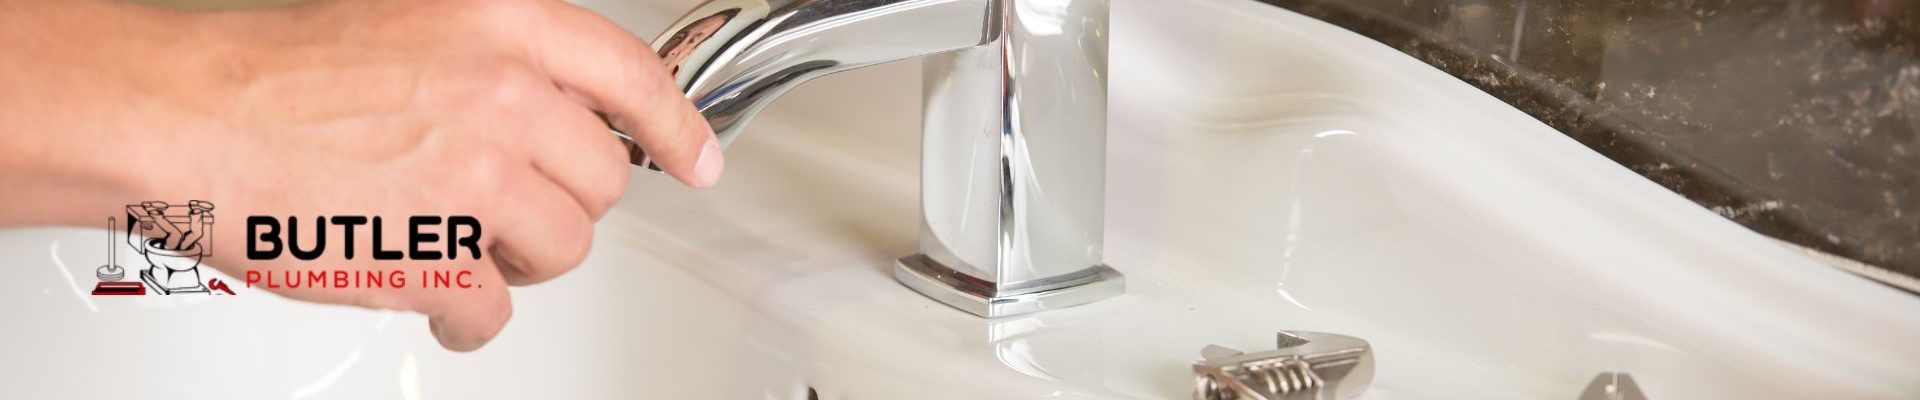 Maintain Your Plumbing System In Norman